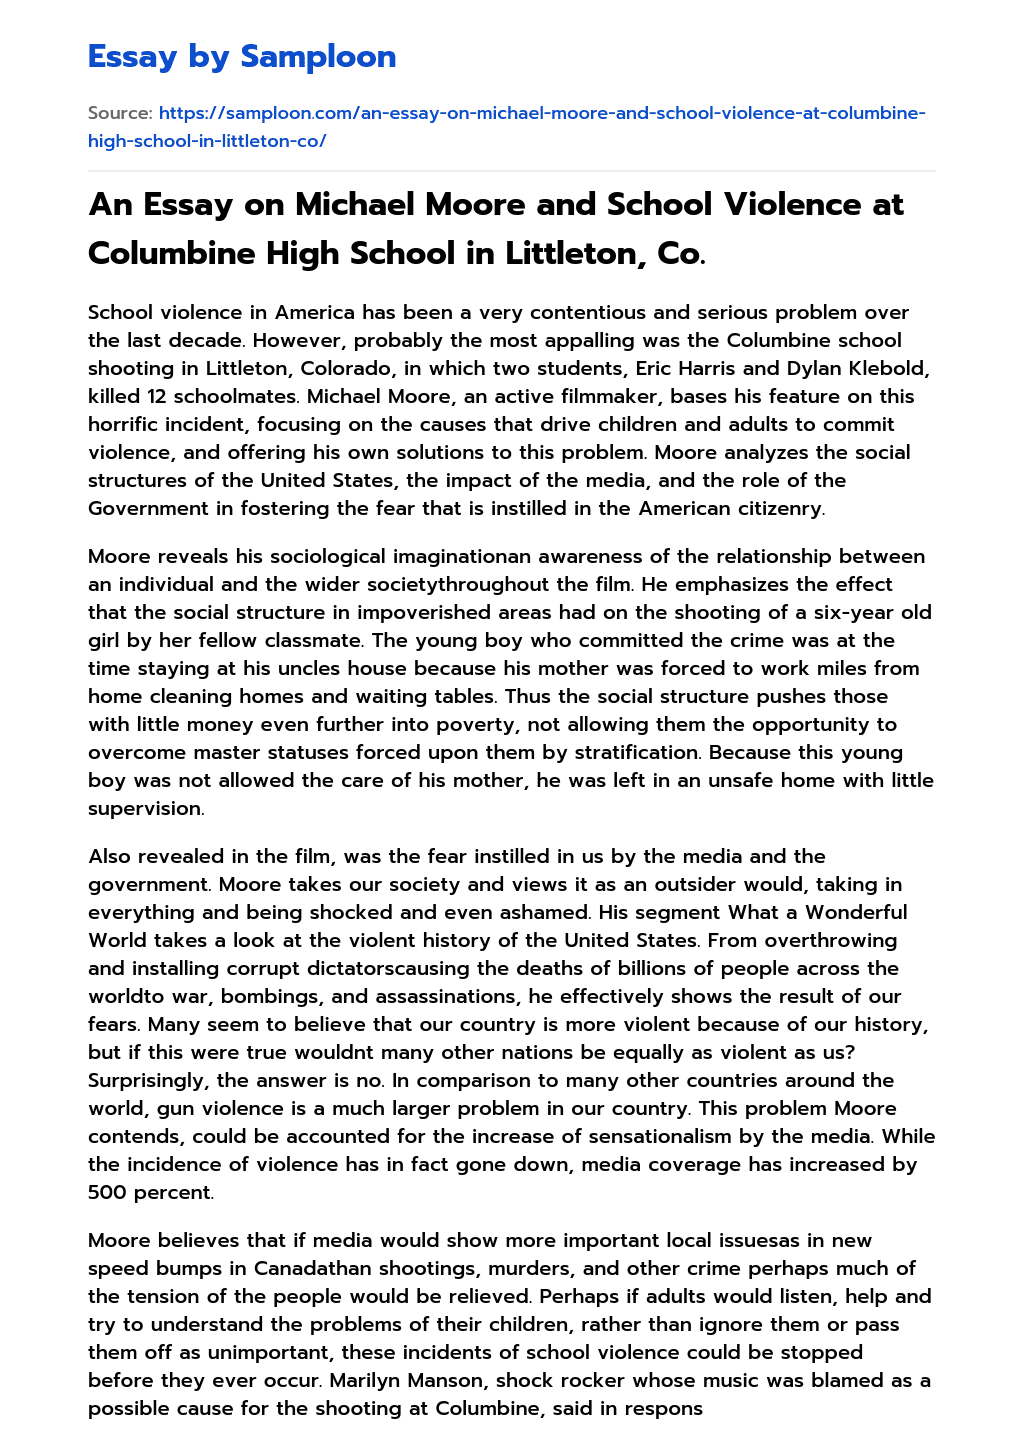 An Essay on Michael Moore and School Violence at Columbine High School in Littleton, Co. essay